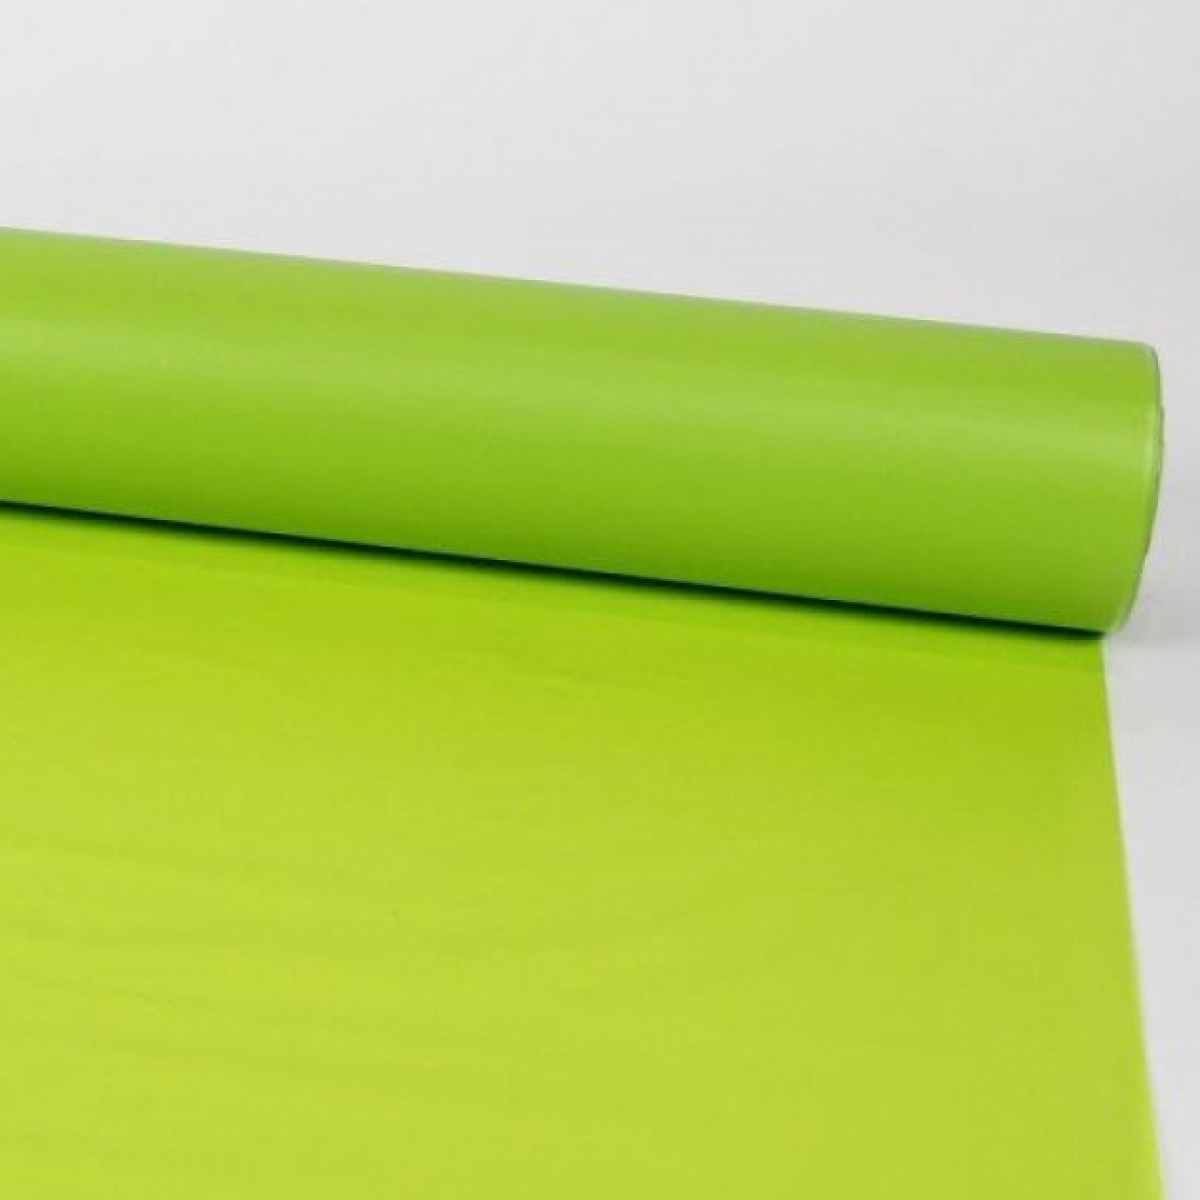 7045 Frosted Lime Green (9Rolls) 80cmx25m 50mic Film